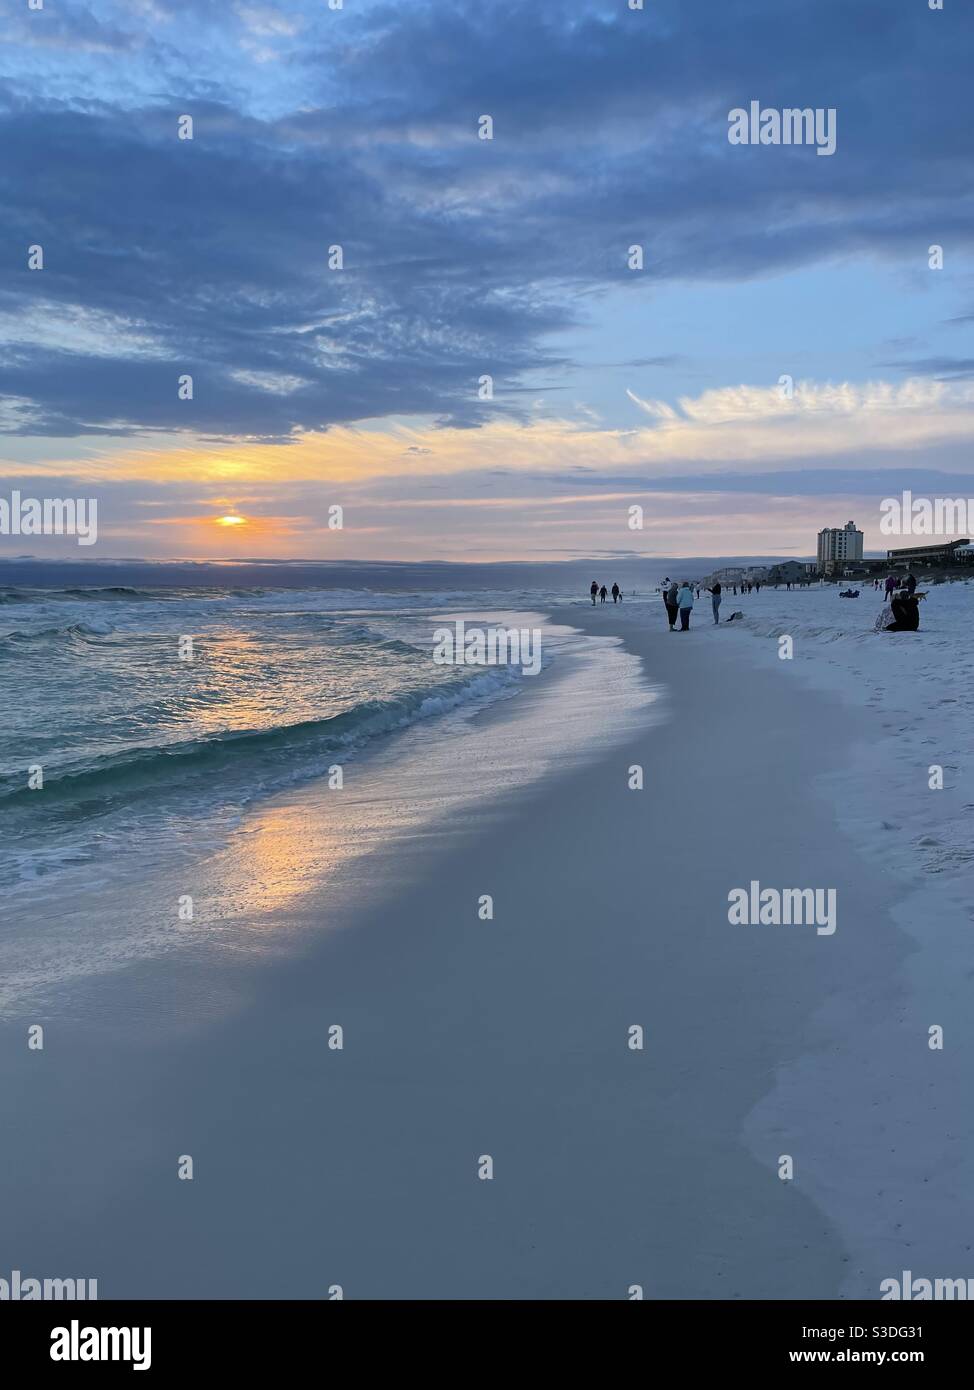 February 15, 2021 Destin, Florida USA People gathered on a chilly winter day to watch sunset on the beach Stock Photo